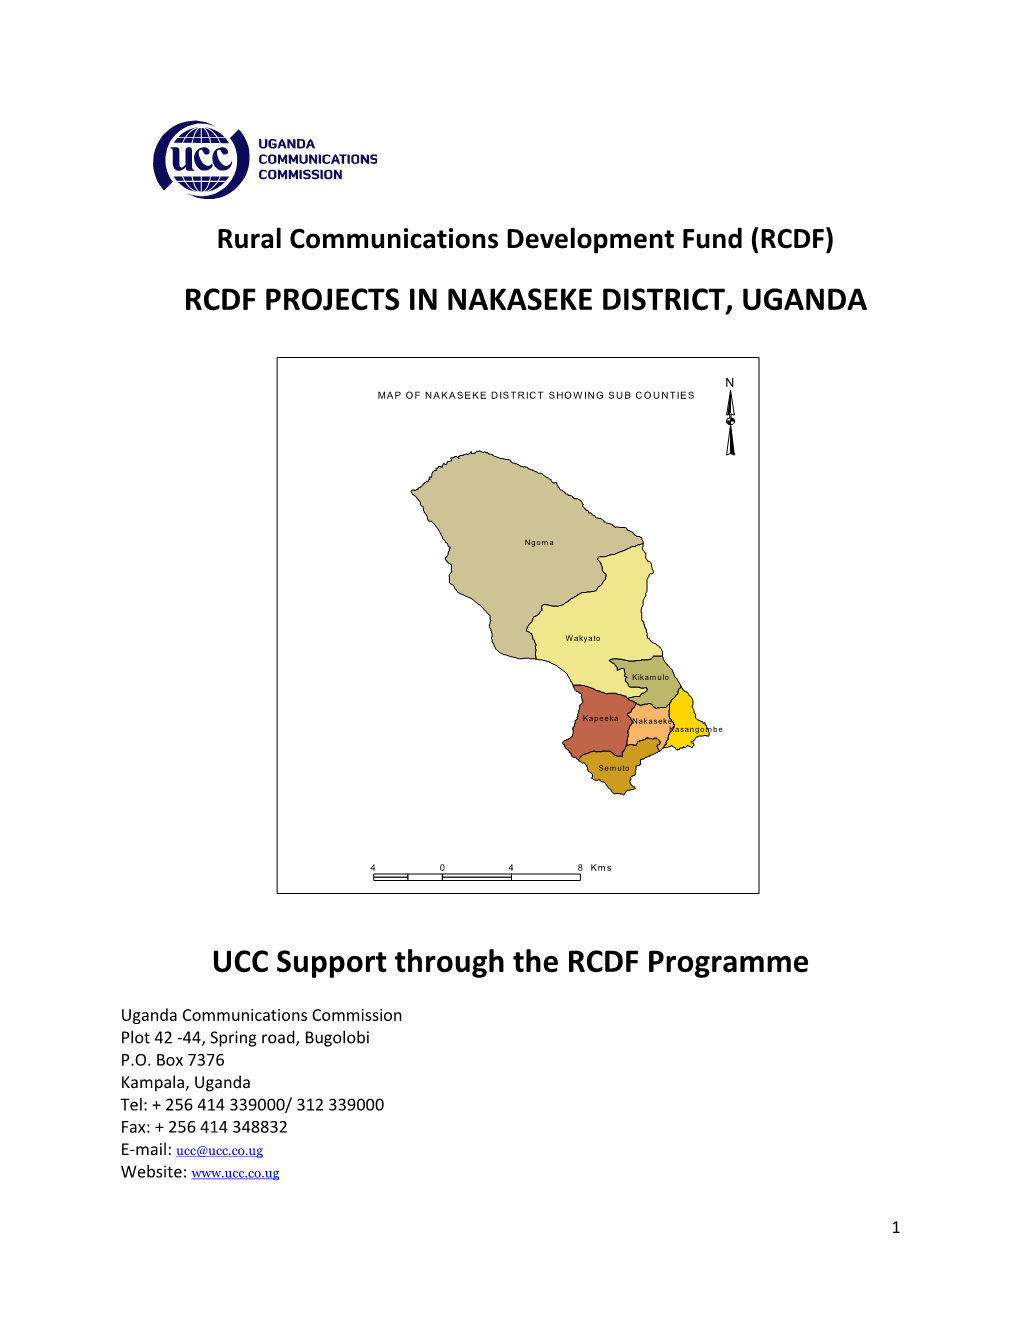 RCDF PROJECTS in NAKASEKE DISTRICT, UGANDA UCC Support